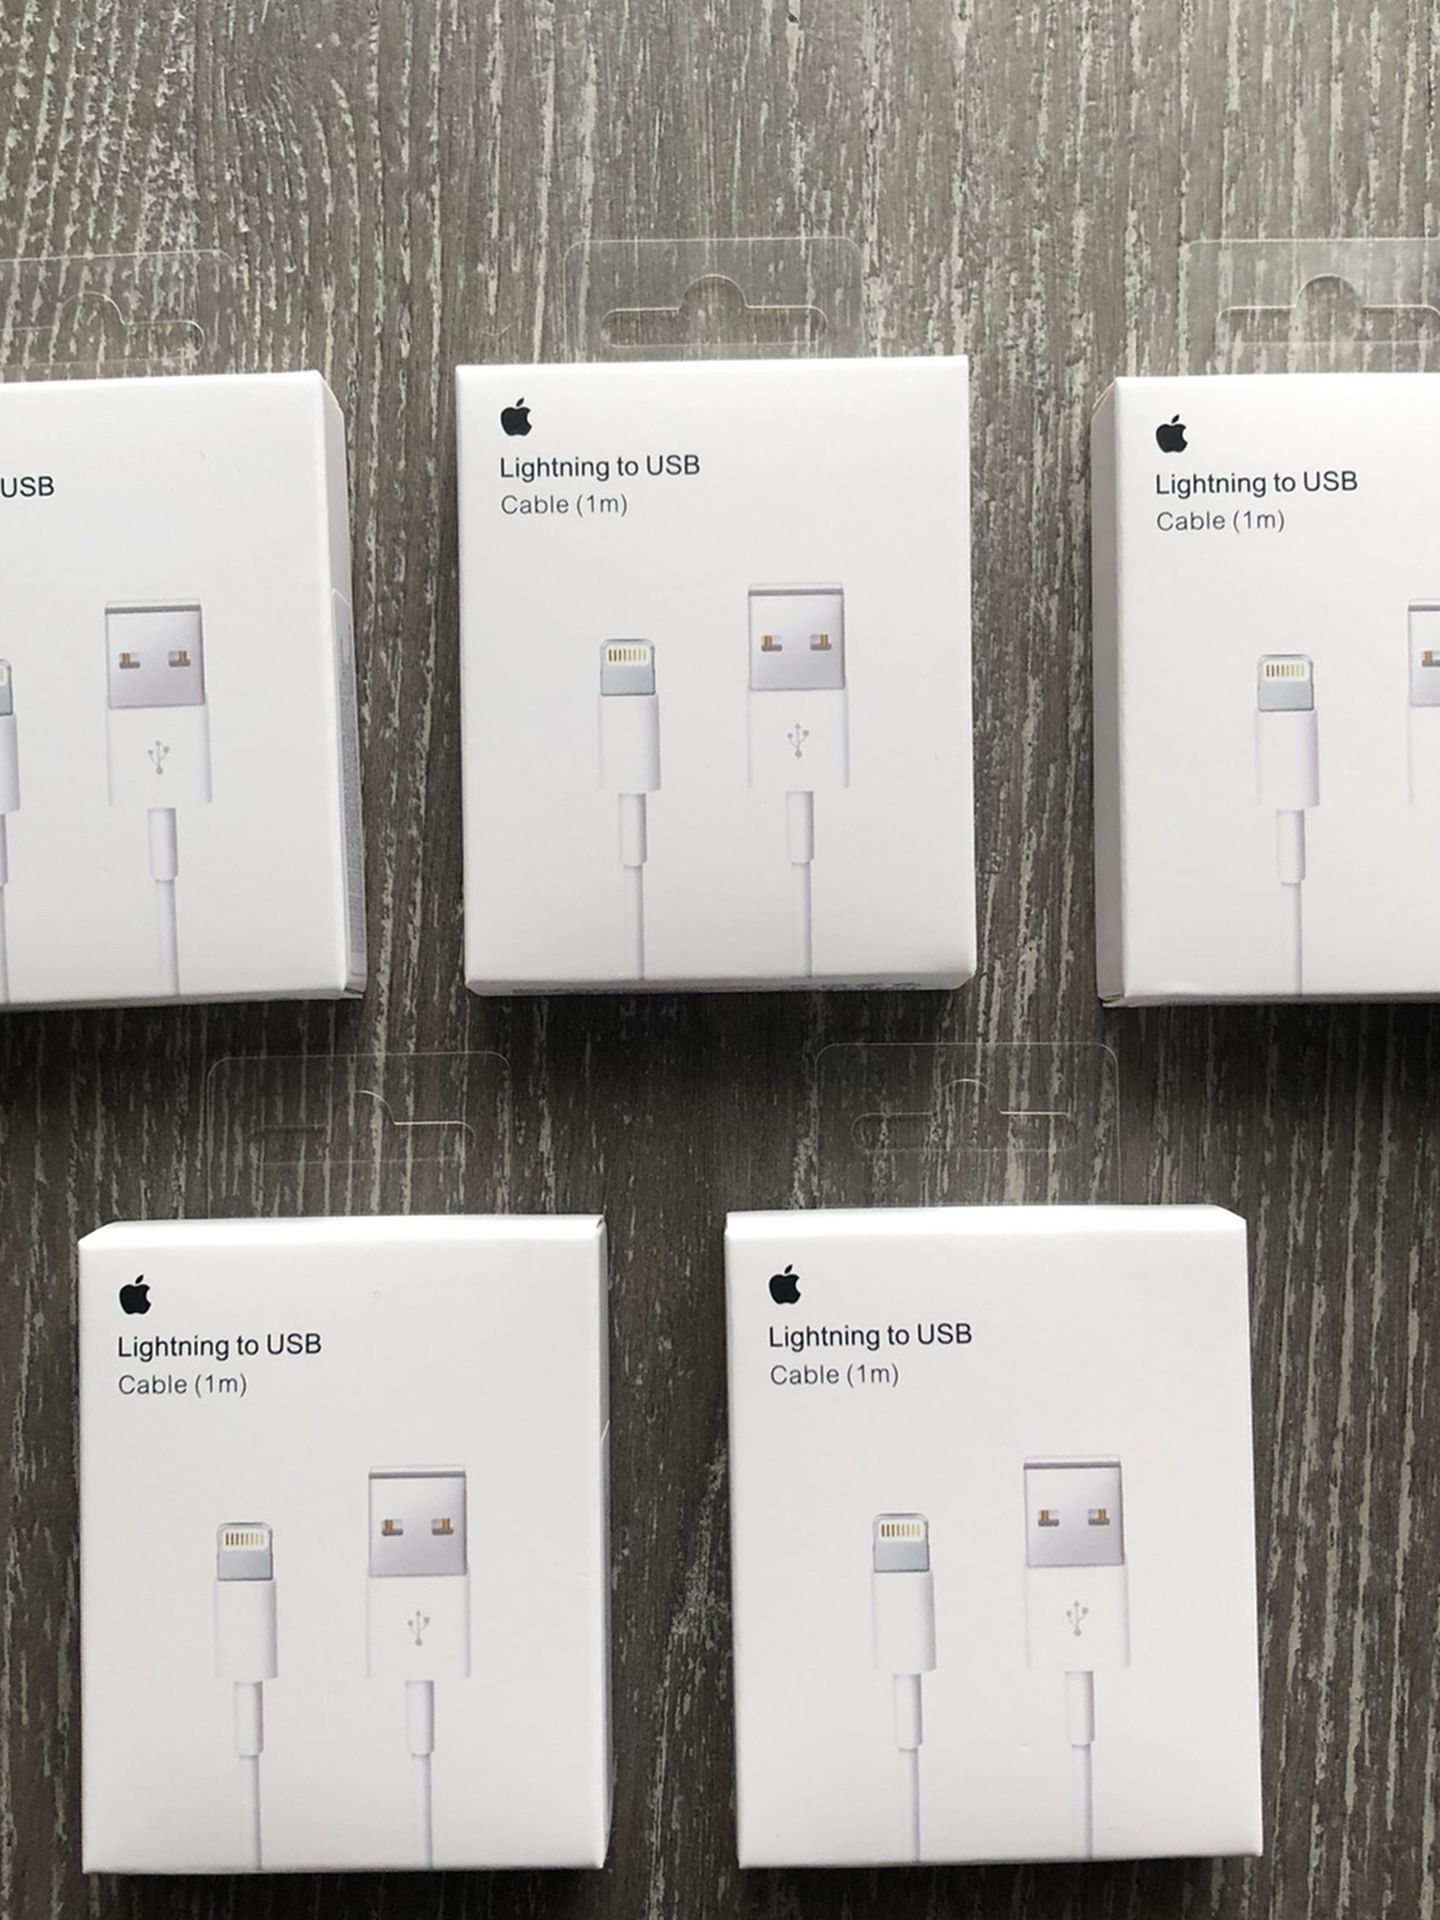 5 Original iPhone Apple Chargers